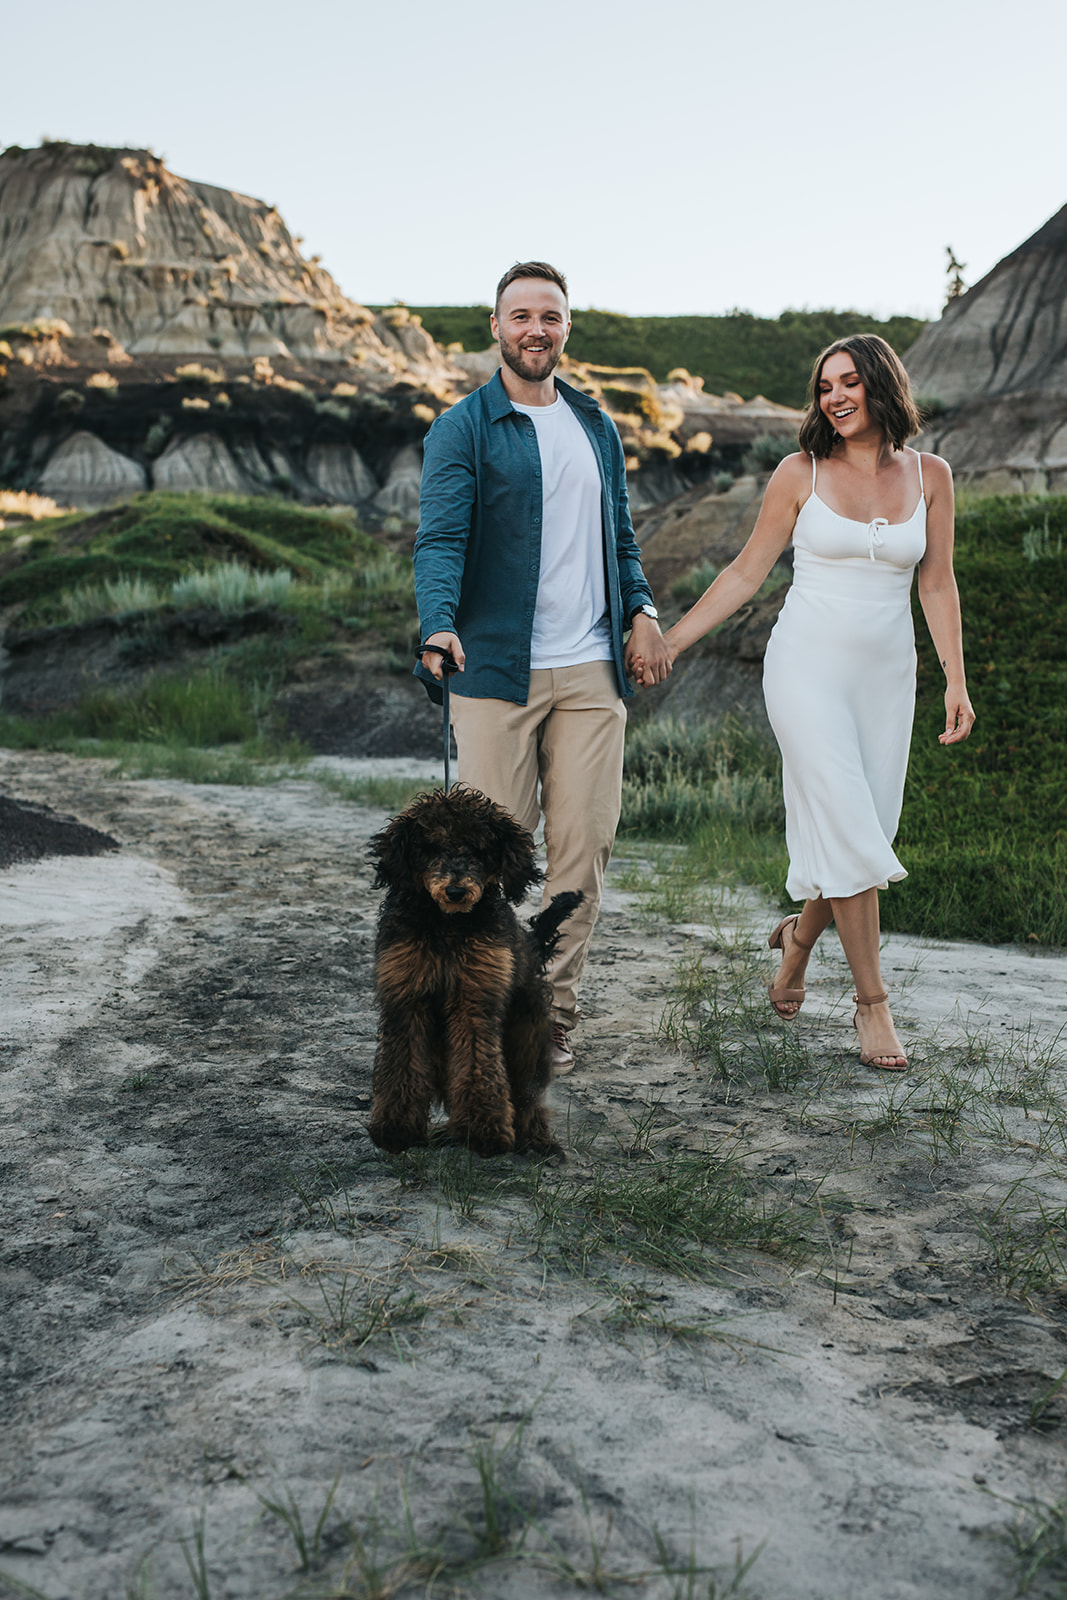 A couple's summer Engagement Photography Session at Horseshoe Canyon with puppy